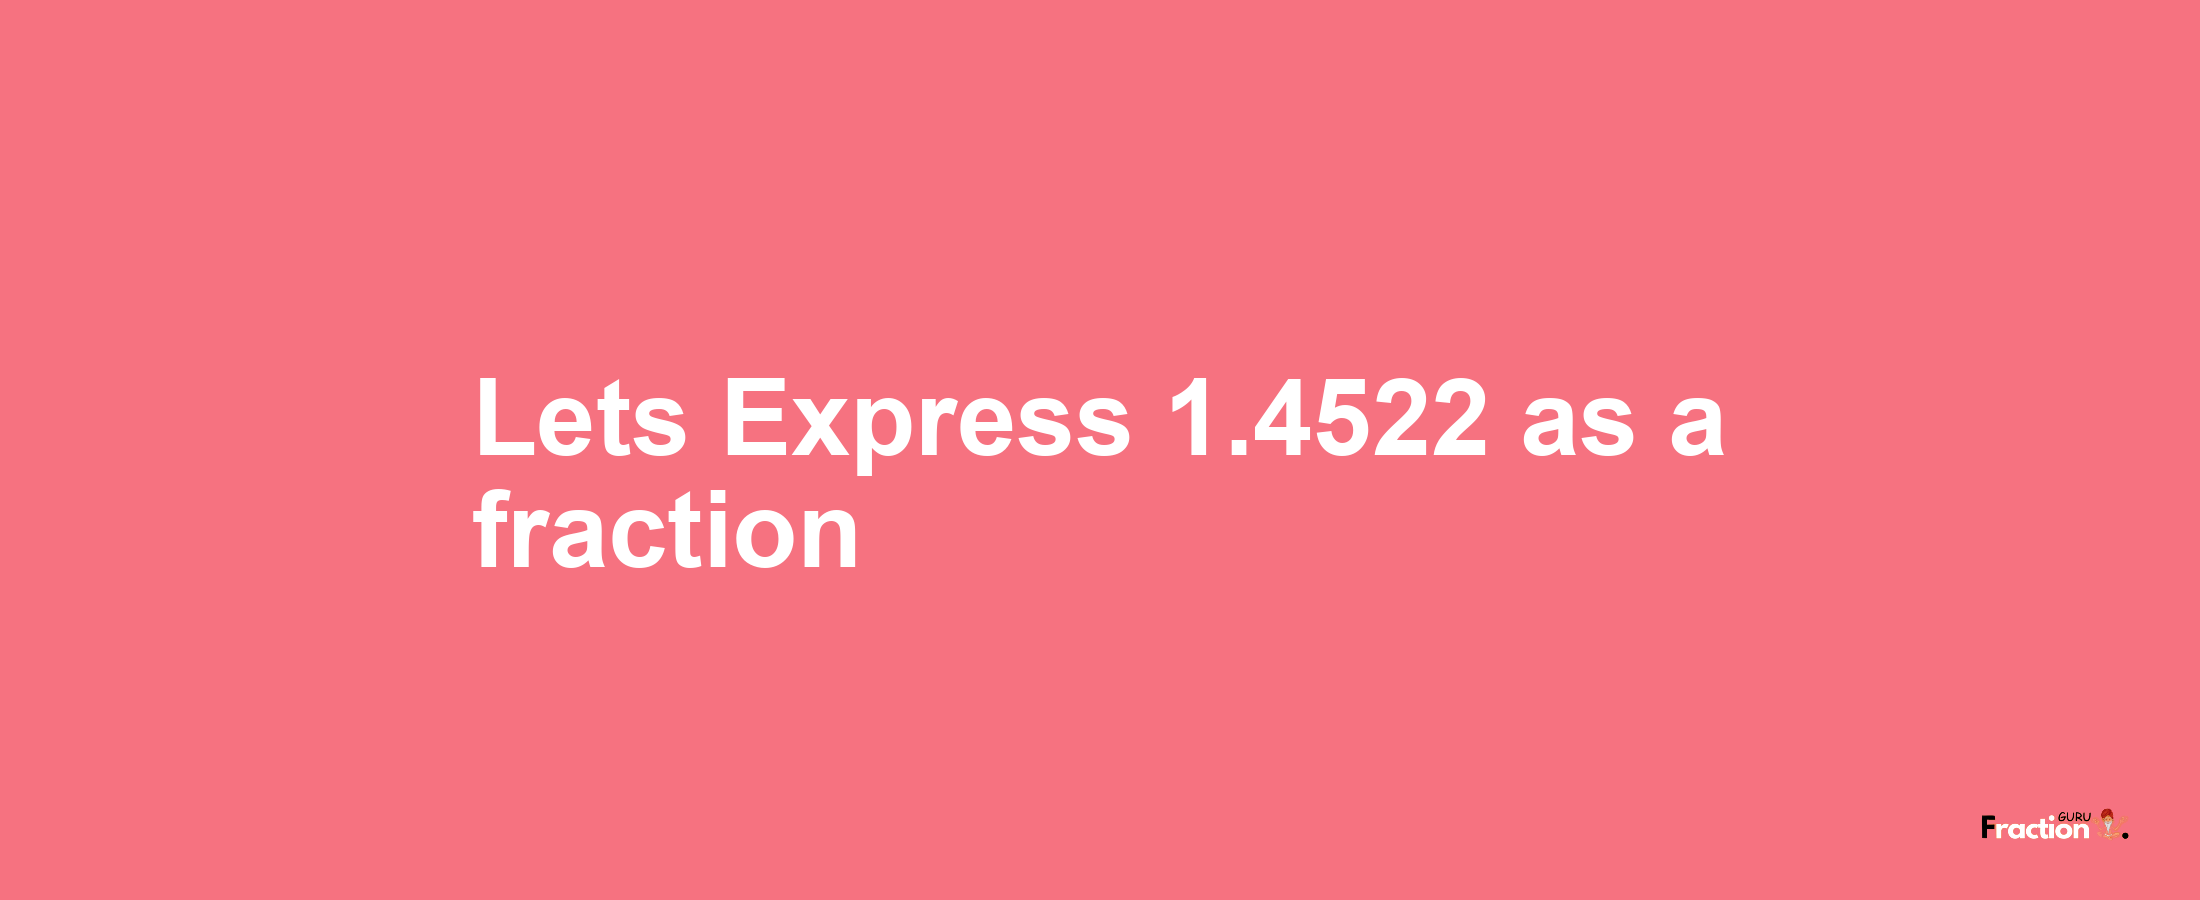 Lets Express 1.4522 as afraction